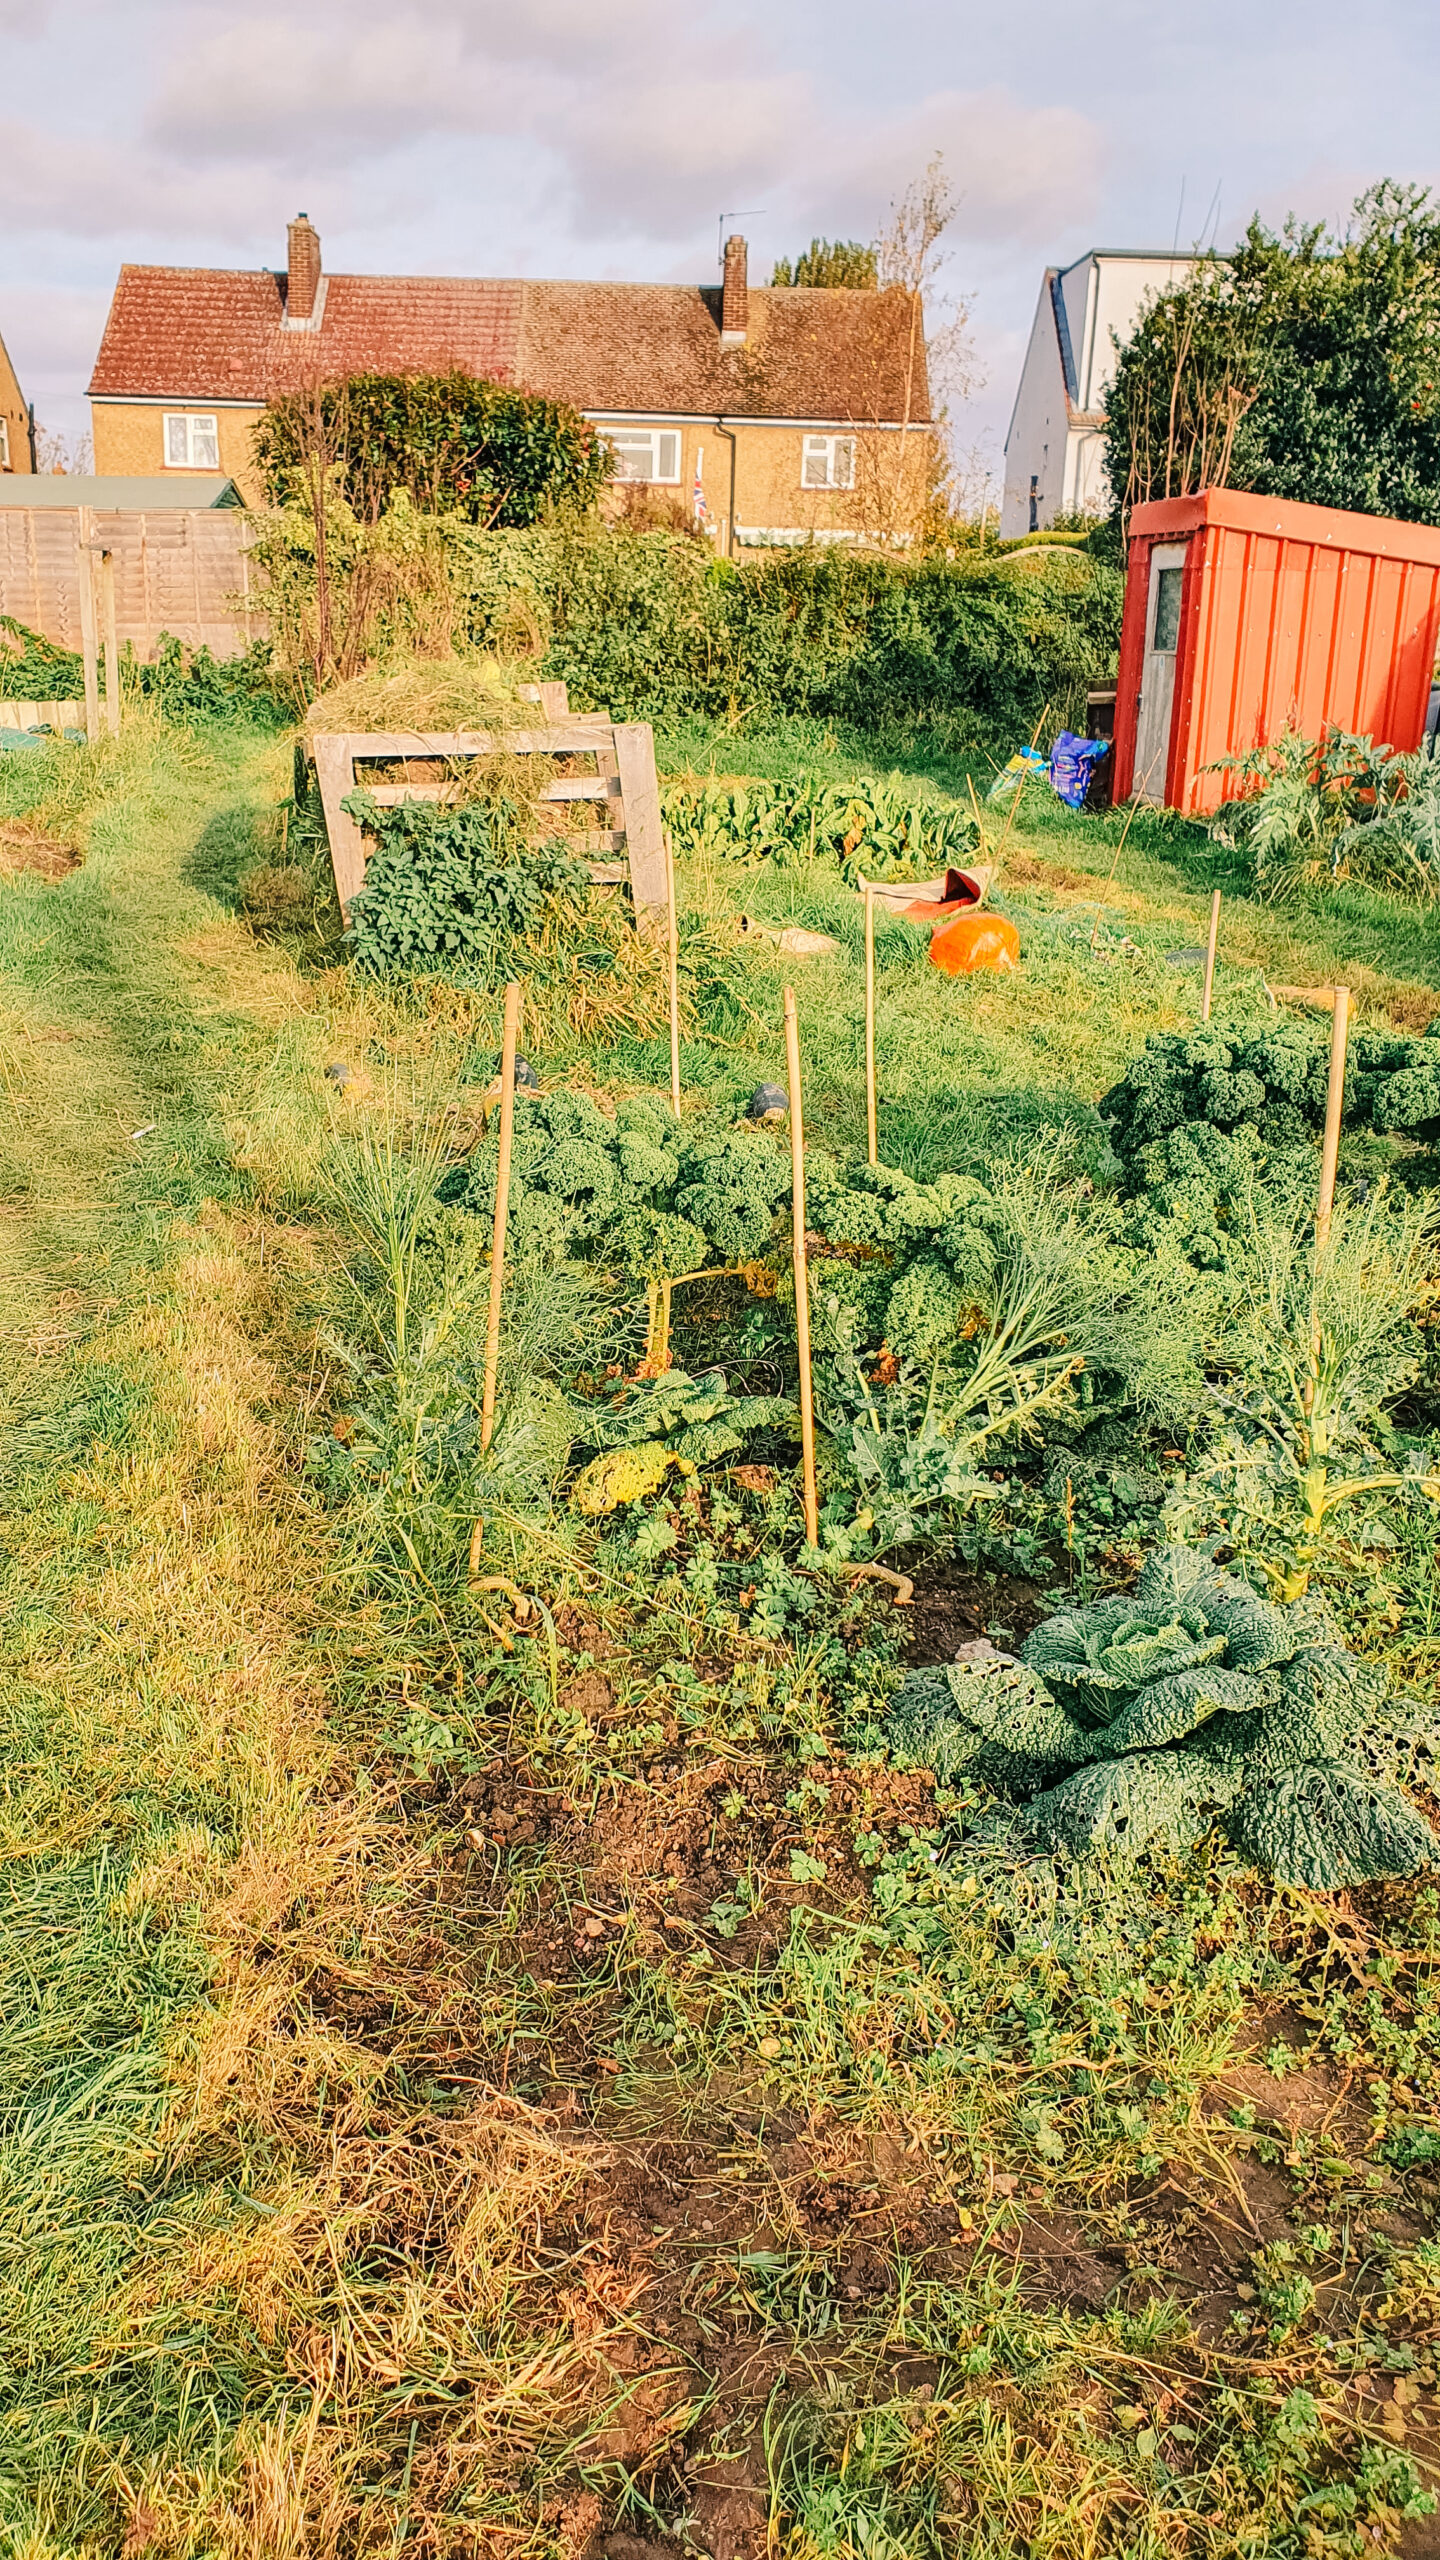 view of the allotment